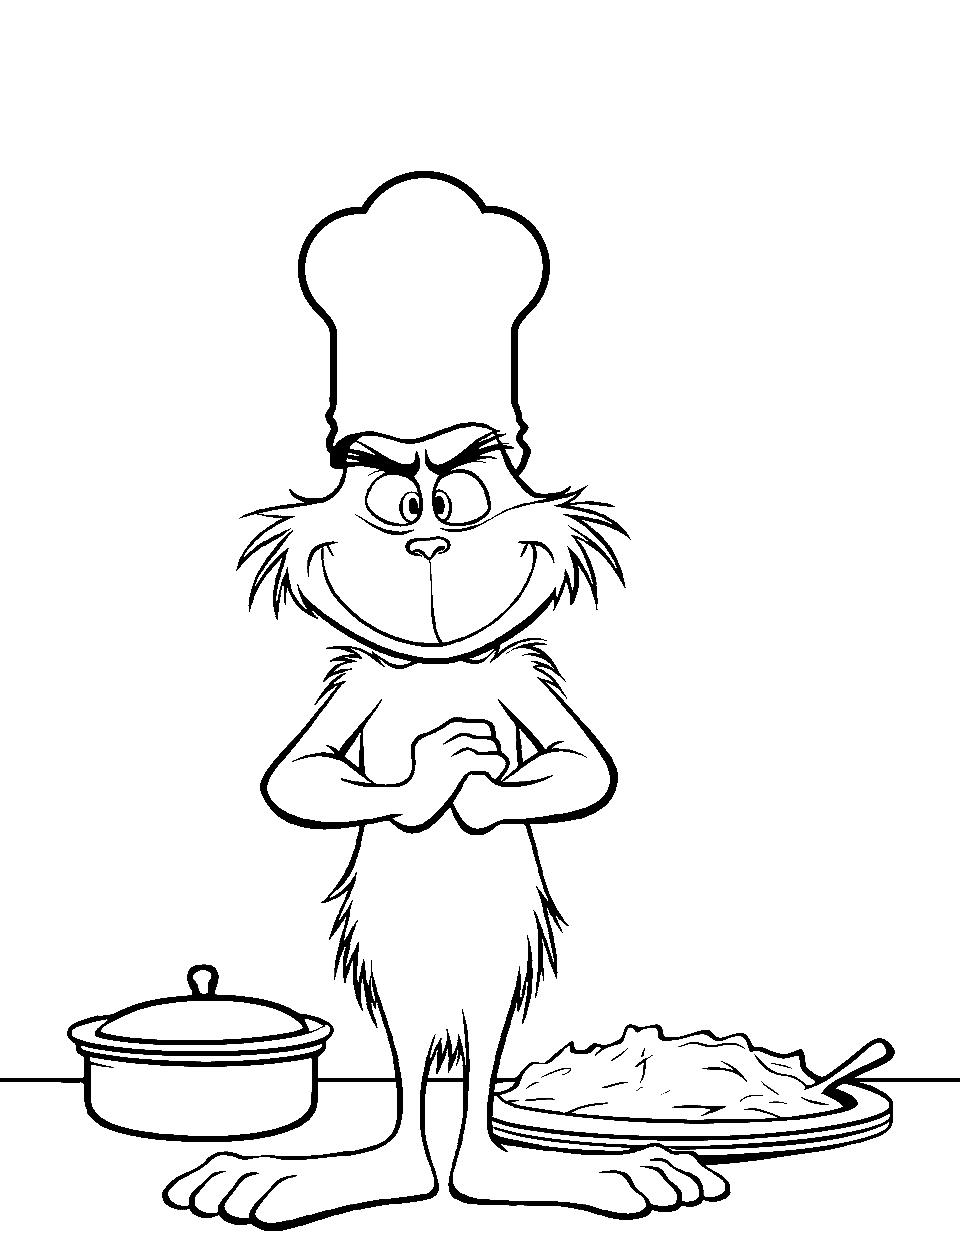 Holiday Cooking Time Coloring Page - The Grinch is baking cookies in a kitchen with a chef’s hat on.